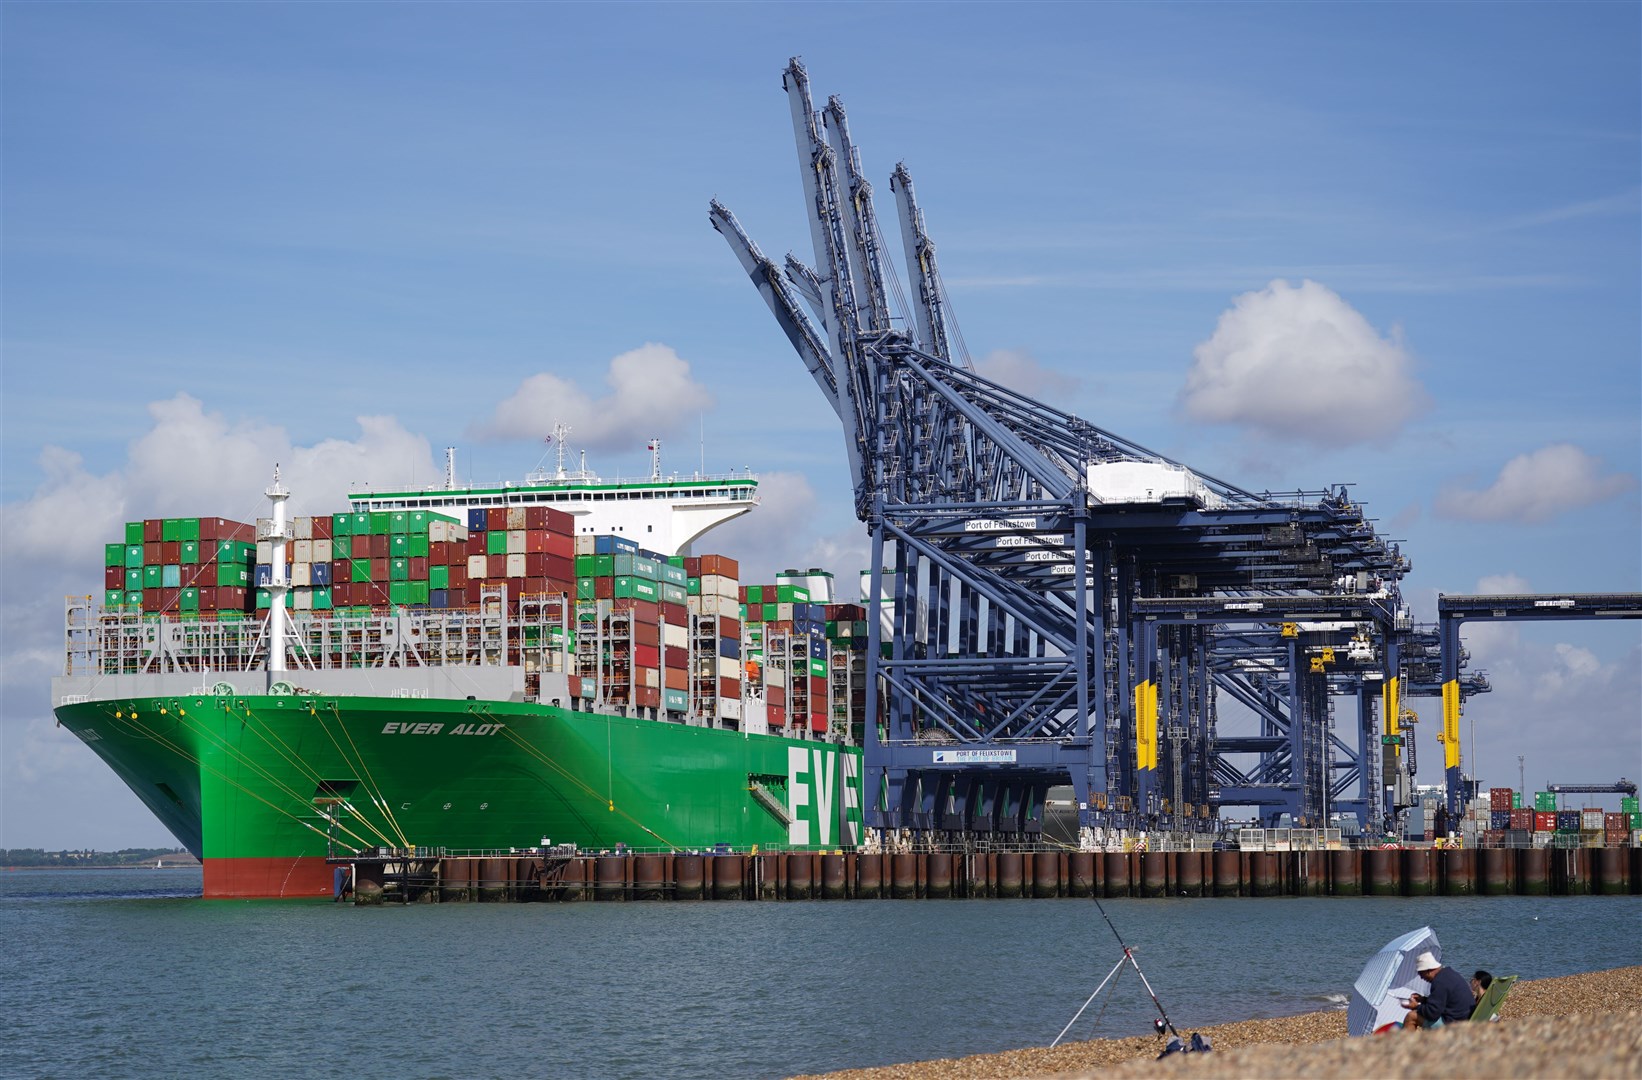 The cargo ship Ever Alot, which is docked at the Port of Felixstowe (Joe Giddens/PA)